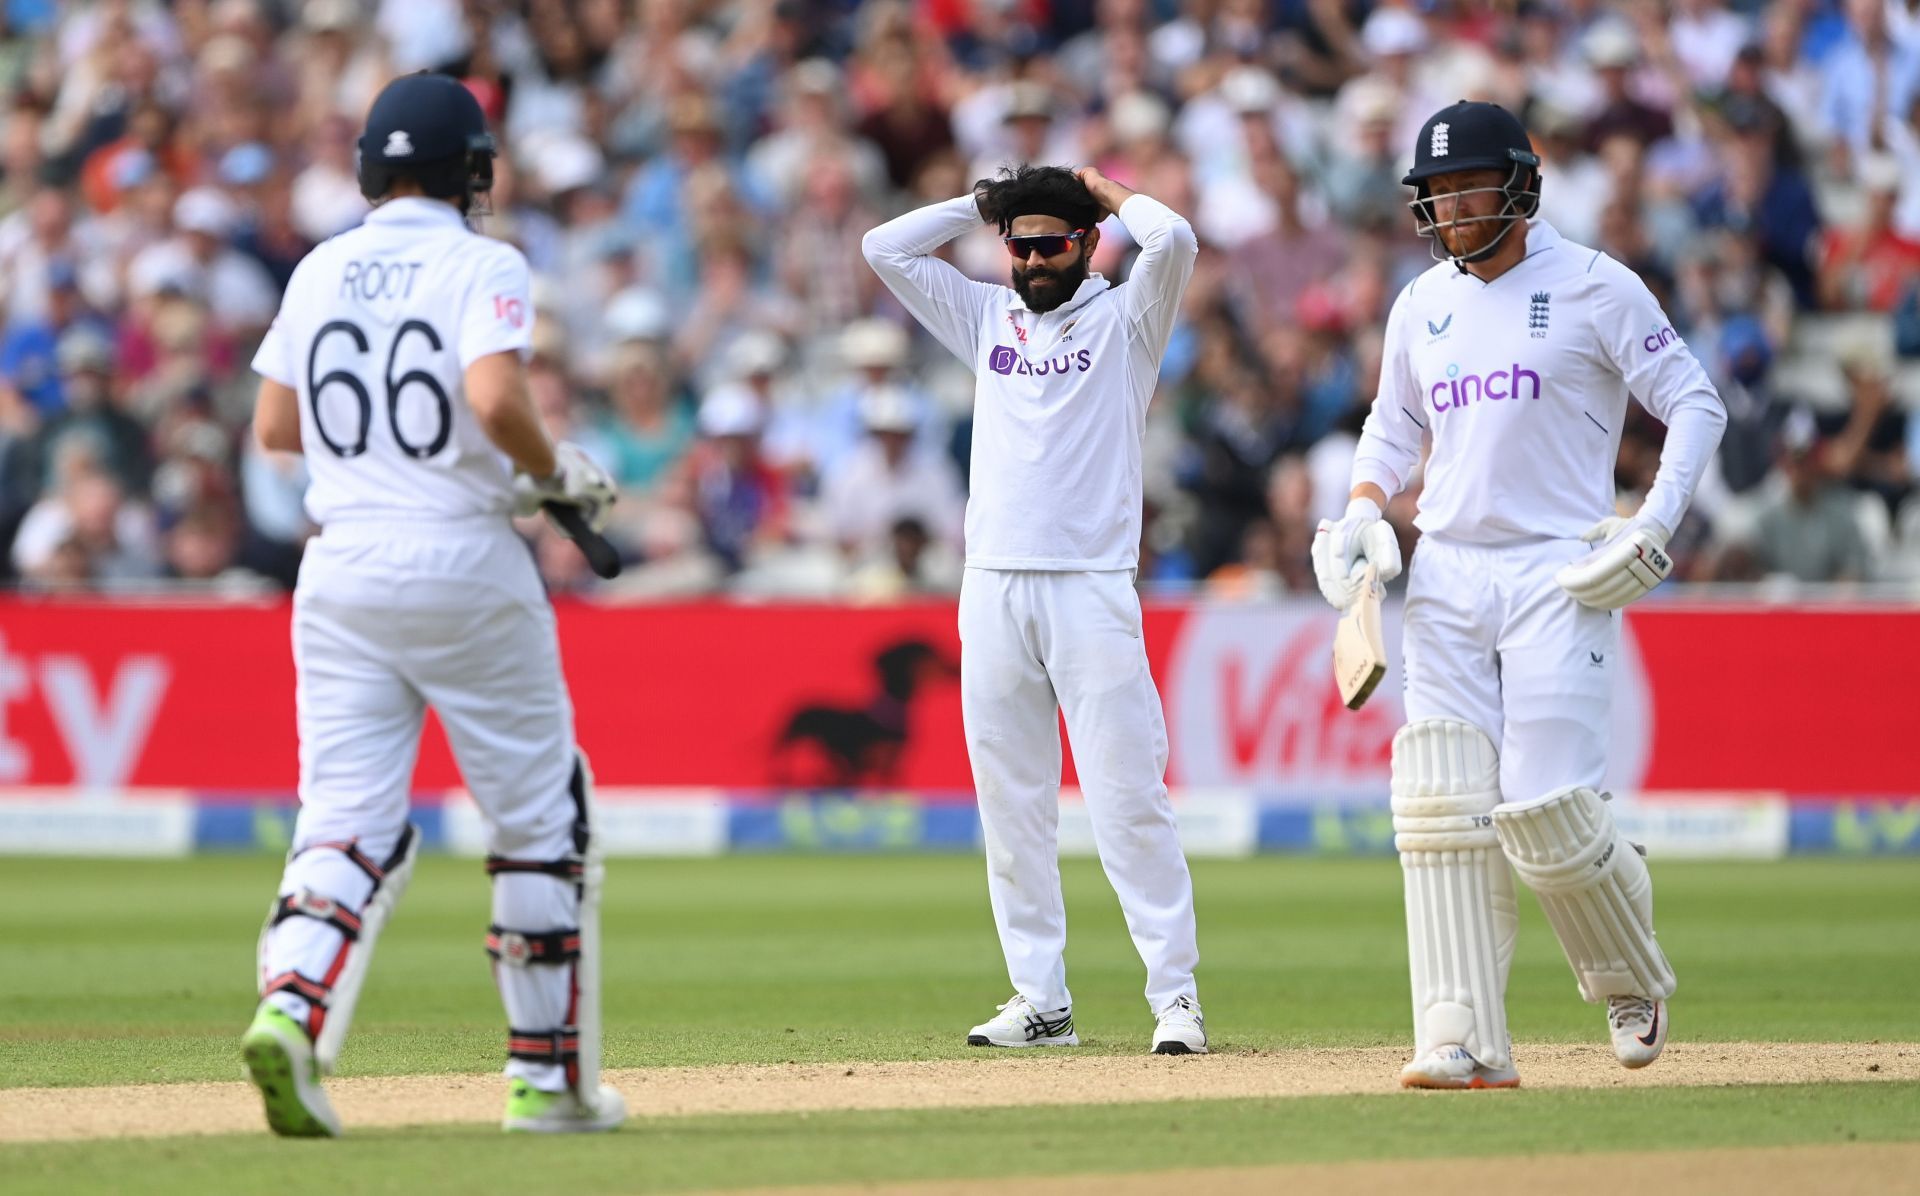 Ravindra Jadeja reacts as Jonny Bairstow and Joe Root pick up some runs. Pic: Getty Images